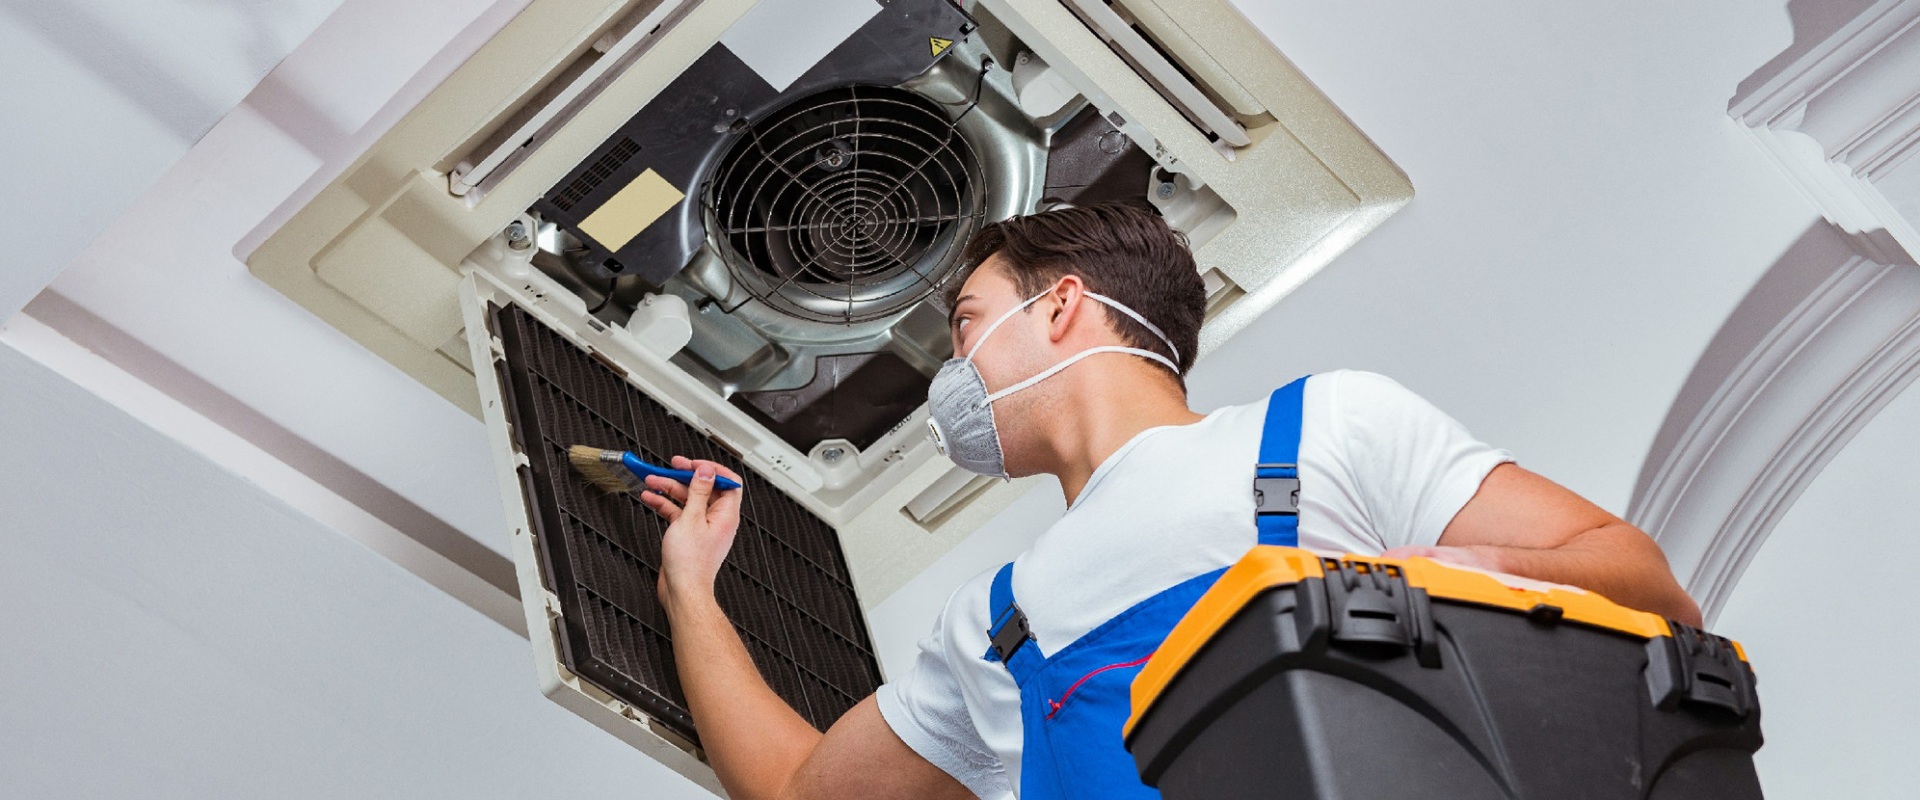 Repairing Air Ducts in Miami-Dade County, FL: What You Need to Know